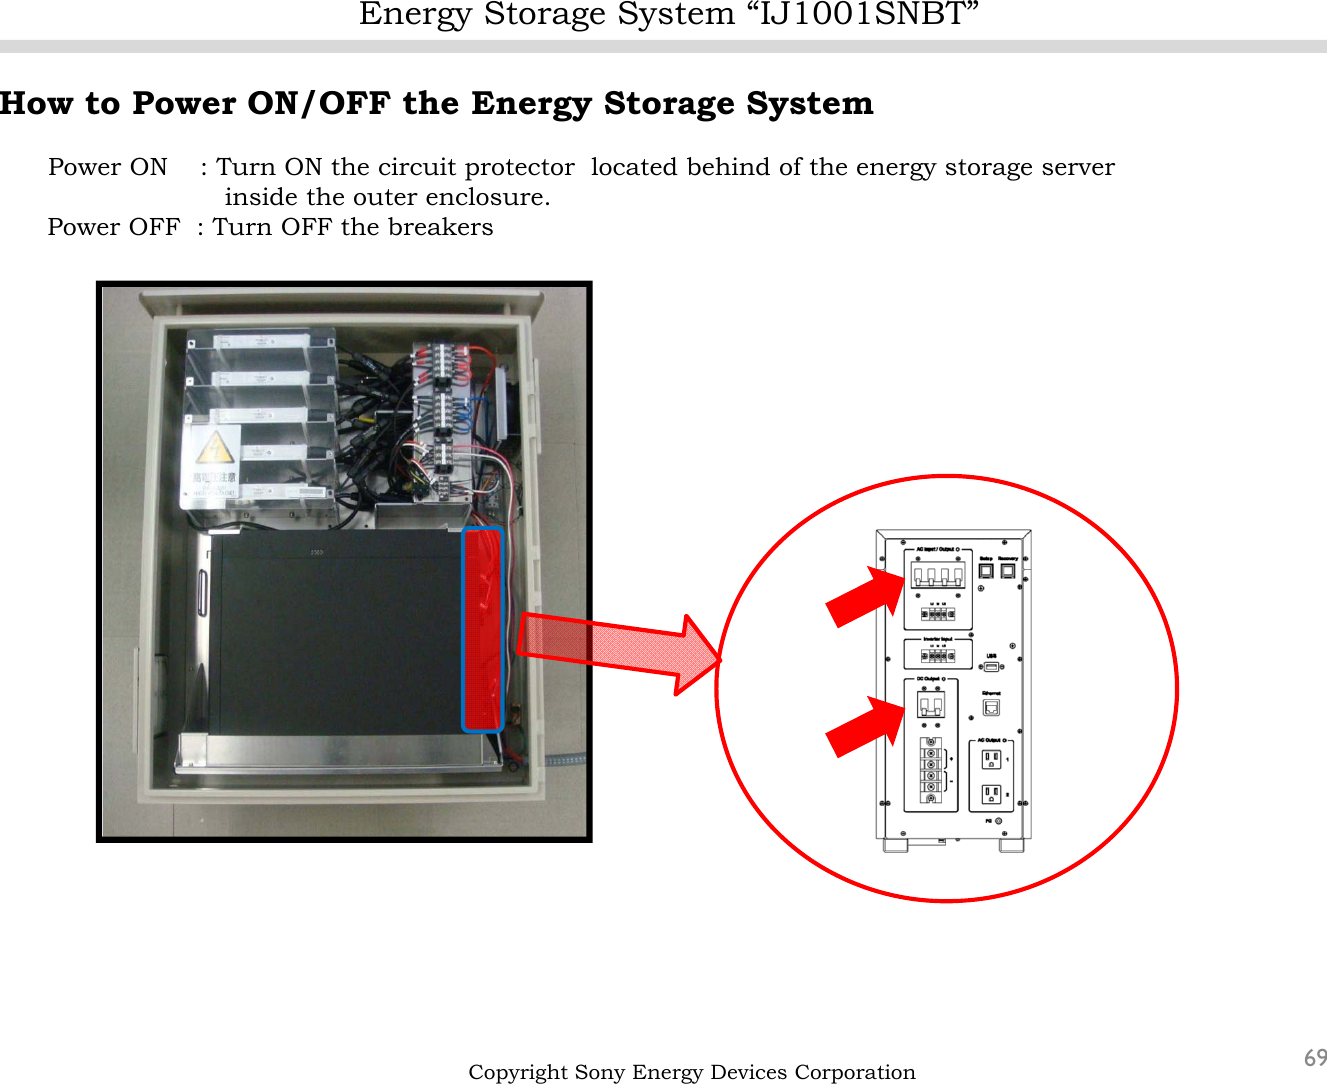 Energy Storage System “IJ1001SNBT”69Copyright Sony Energy Devices CorporationHow to Power ON/OFF the Energy Storage SystemPower ON    : Turn ON the circuit protector  located behind of the energy storage server inside the outer enclosure.Power OFF  : Turn OFF the breakers 